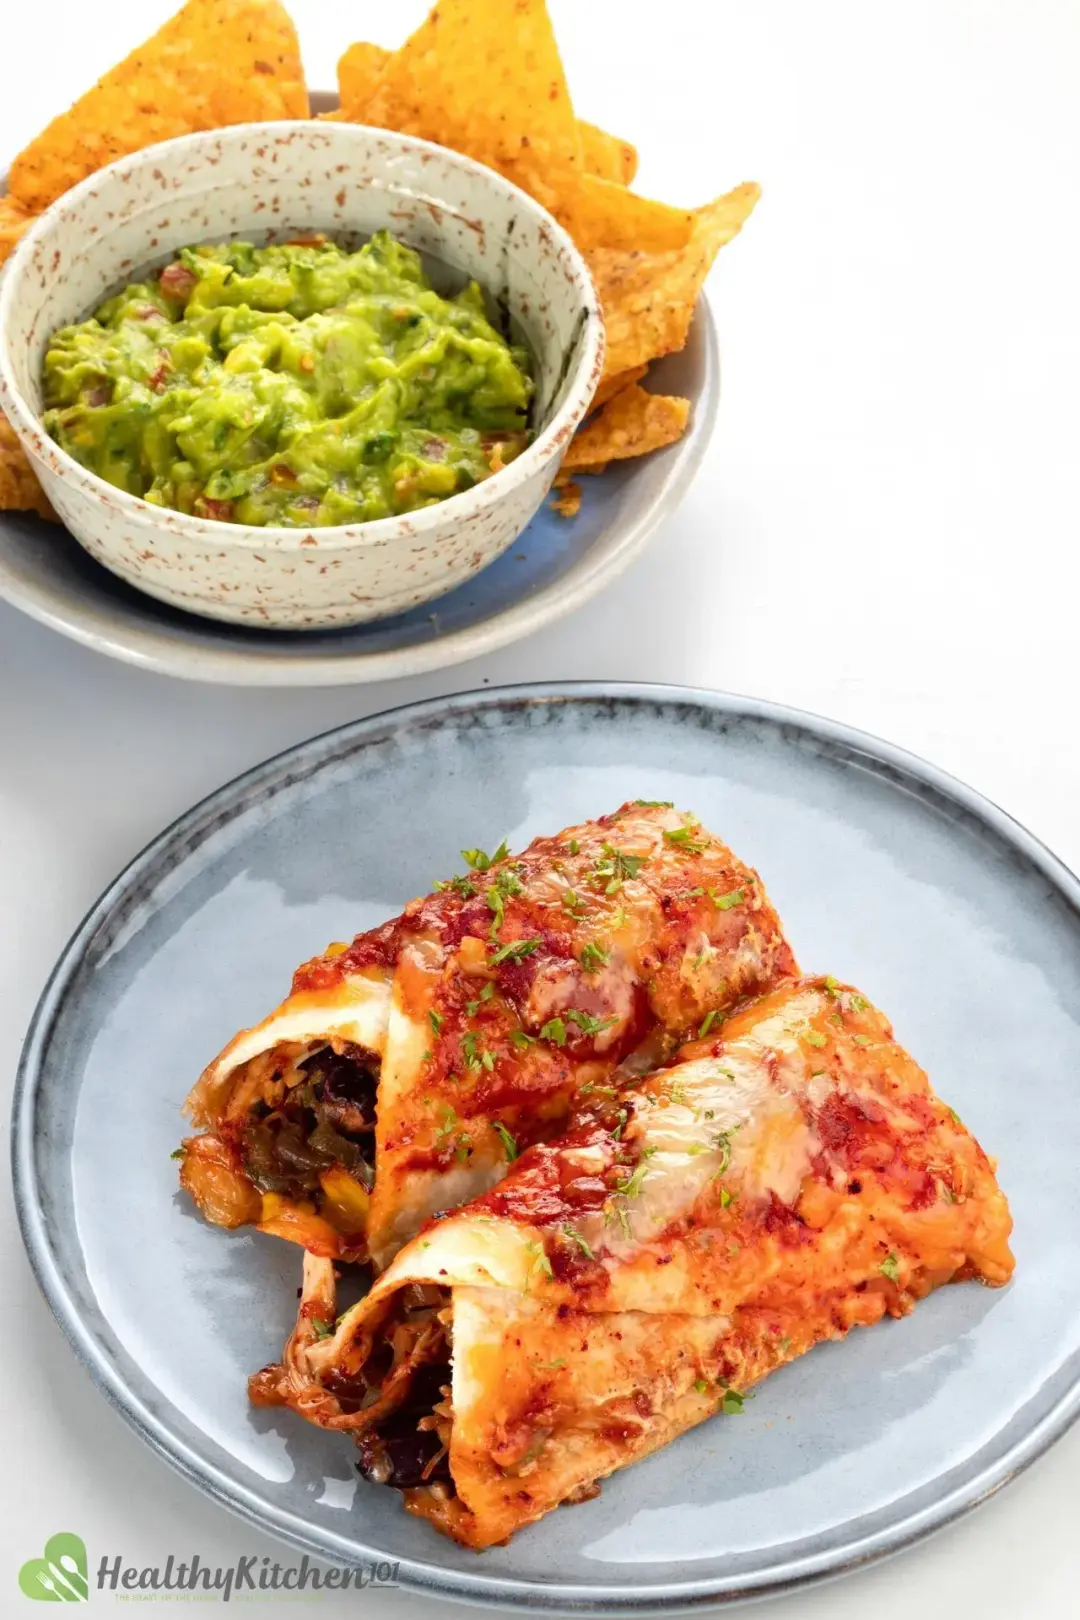 Two golden enchiladas with cheese and tomato sauce next to chips and guacamole